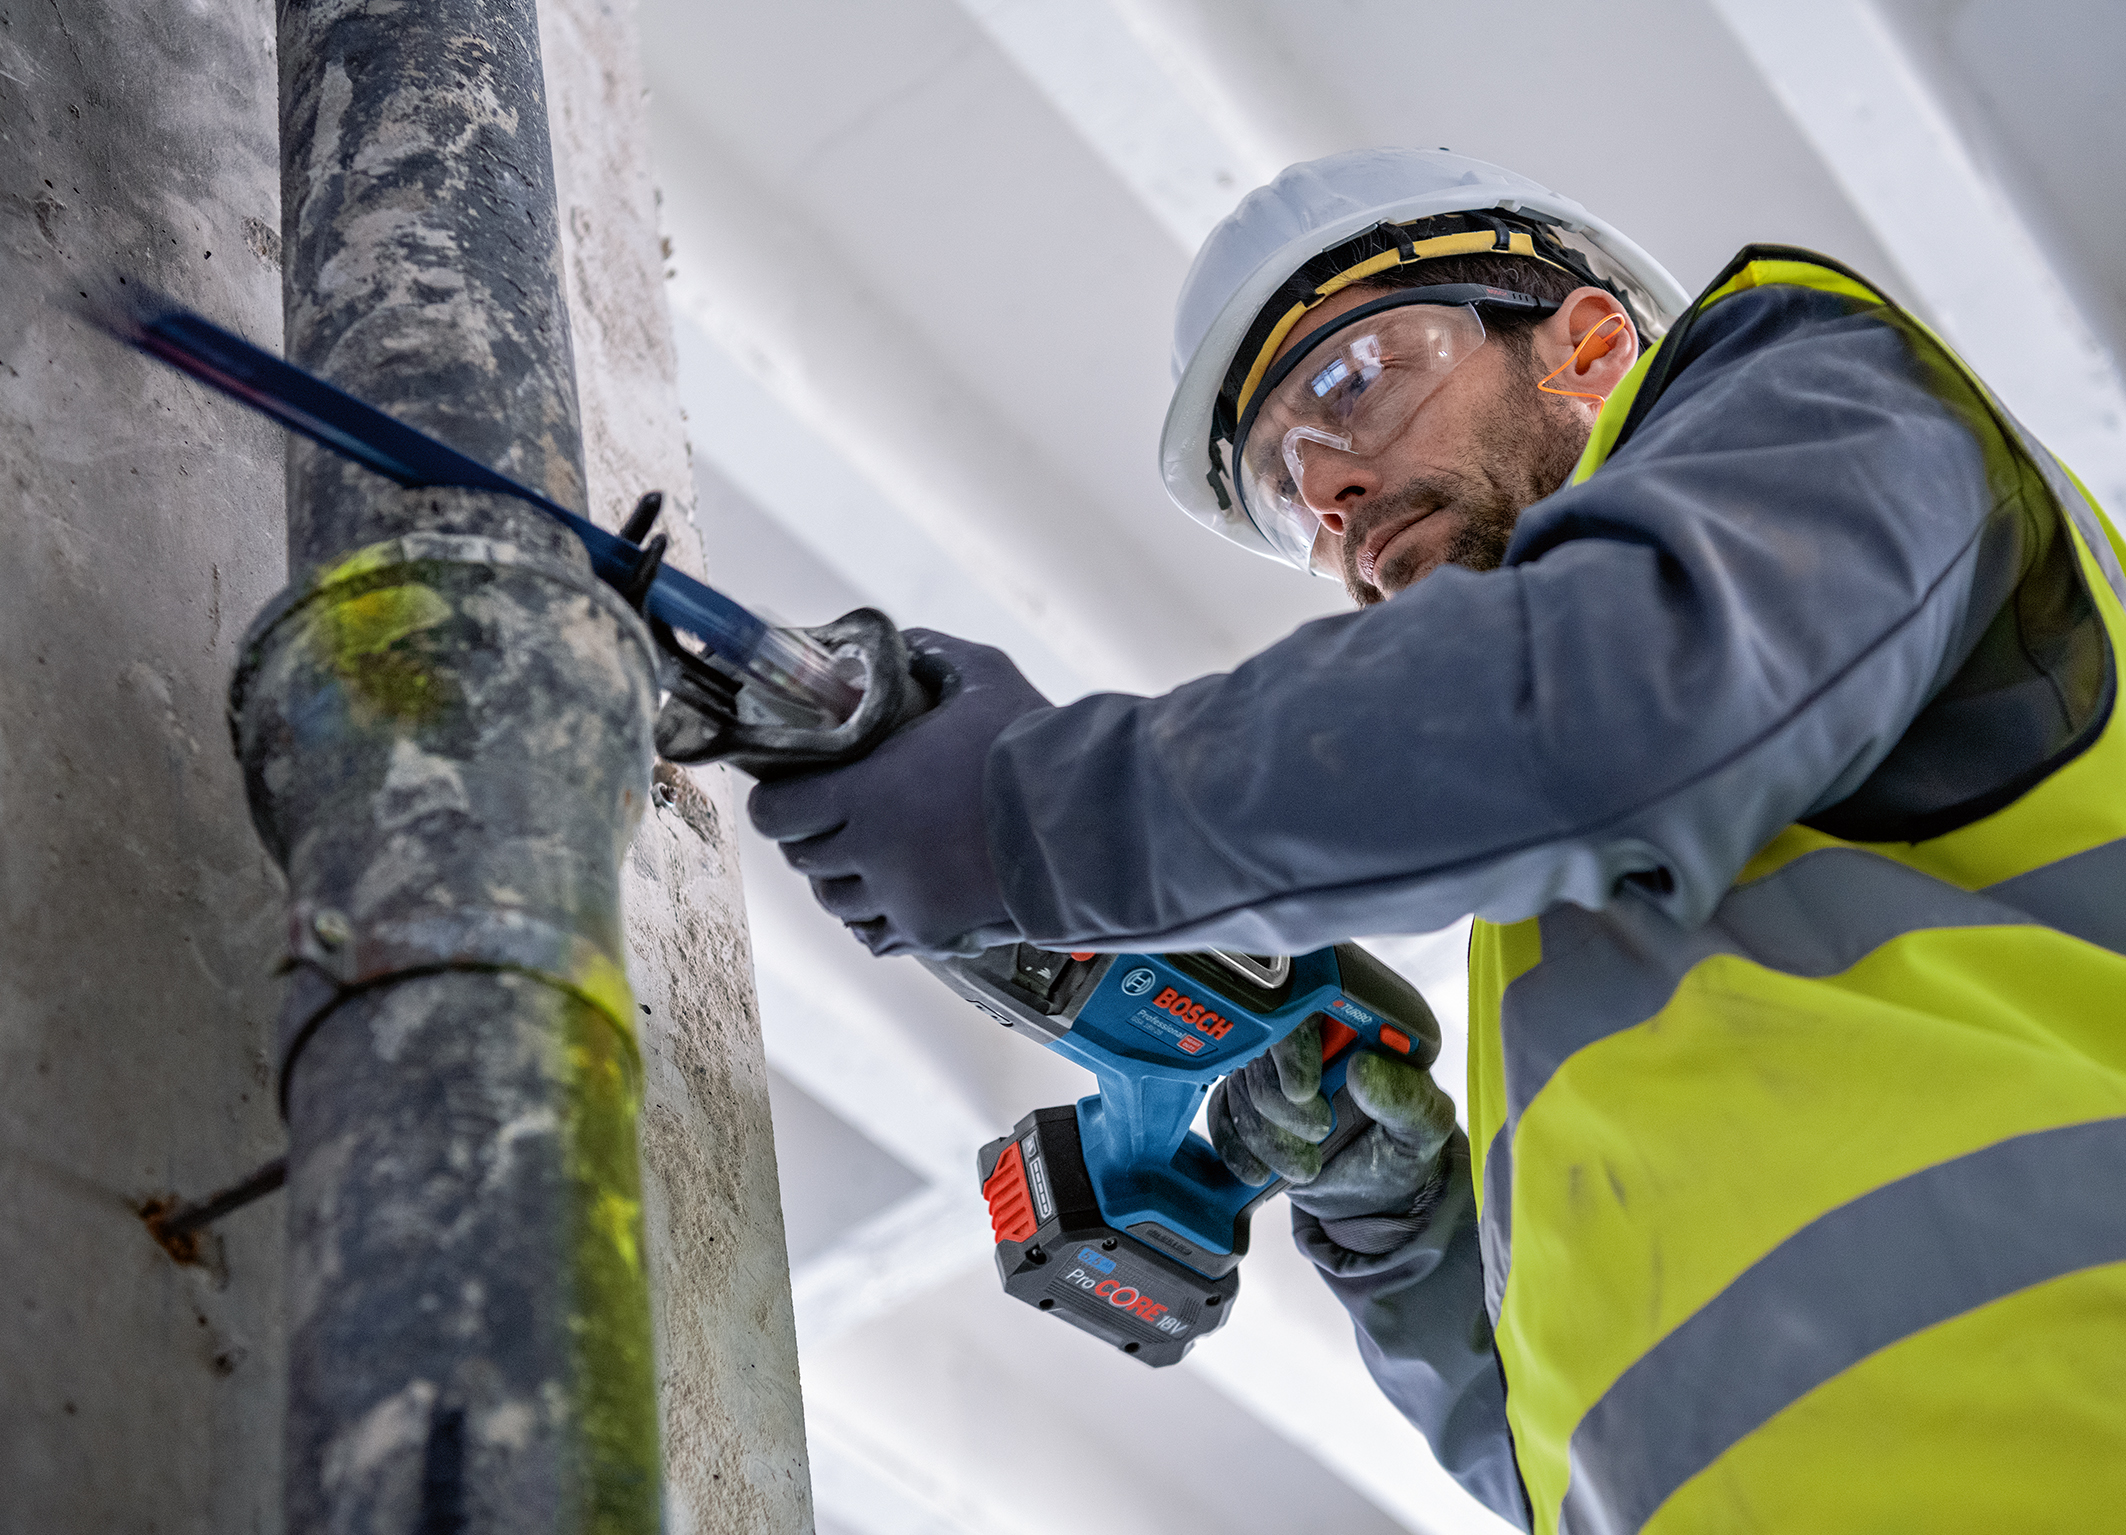 For all kinds of demolition work – even cast-iron pipes: Biturbo cordless reciprocating saw GSA 18V-28 Professional from Bosch